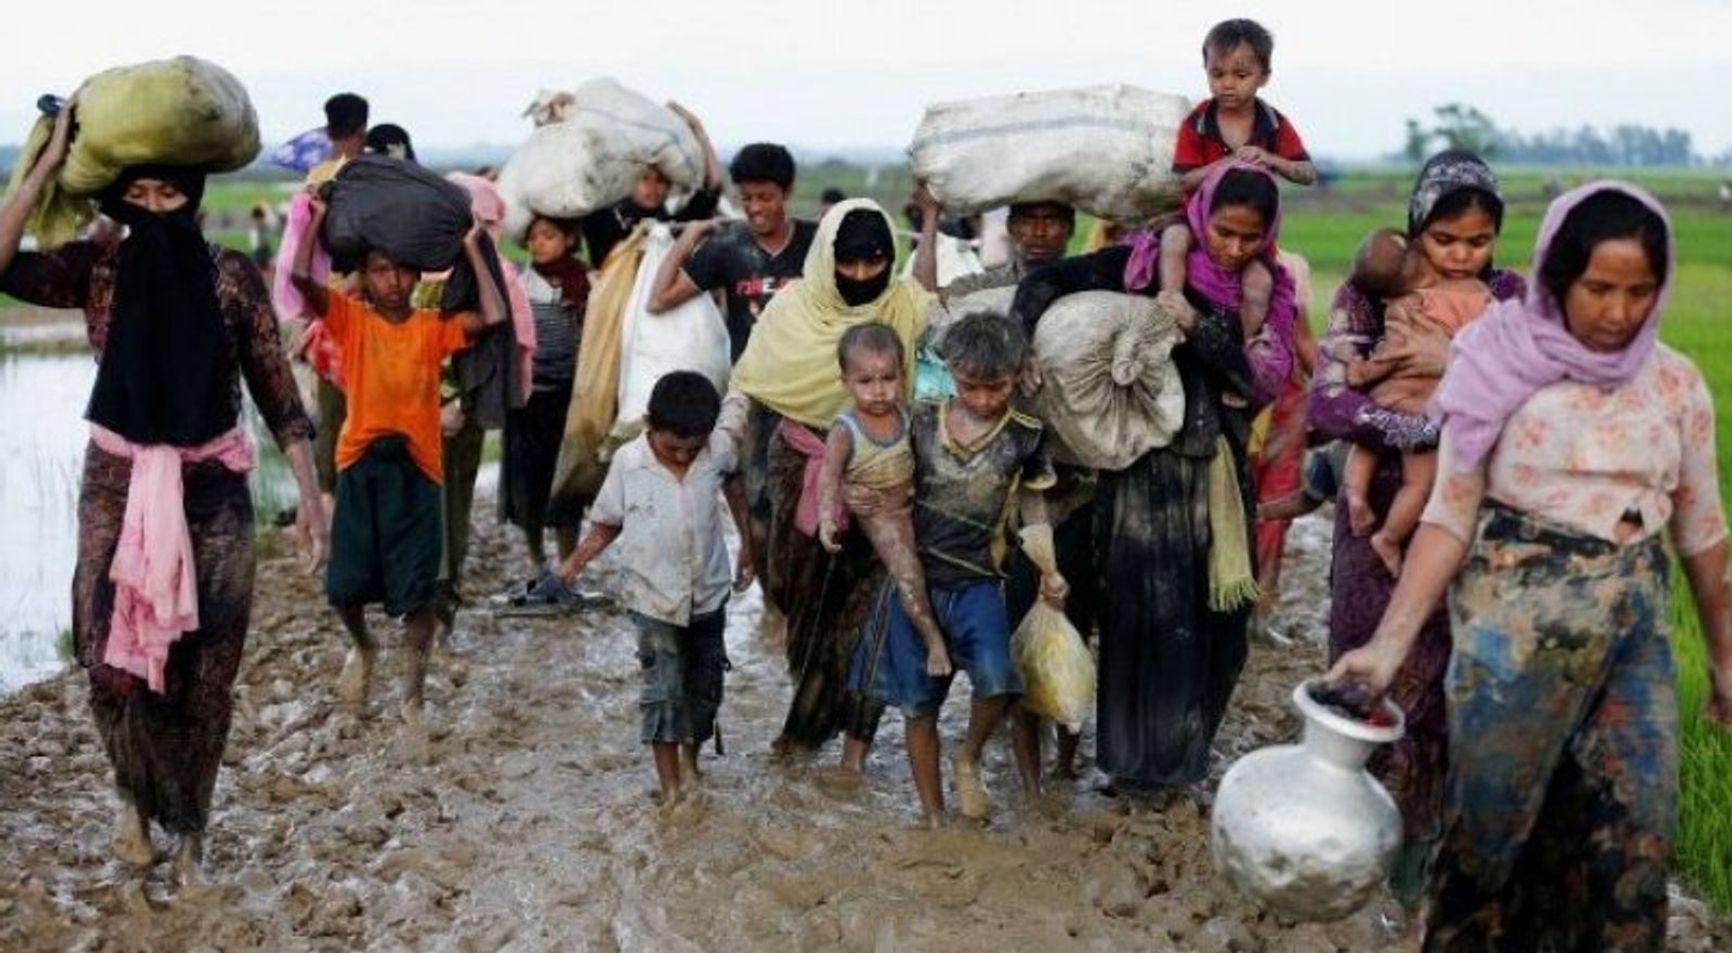 The deportation of the Rohingya was labeled as genocide